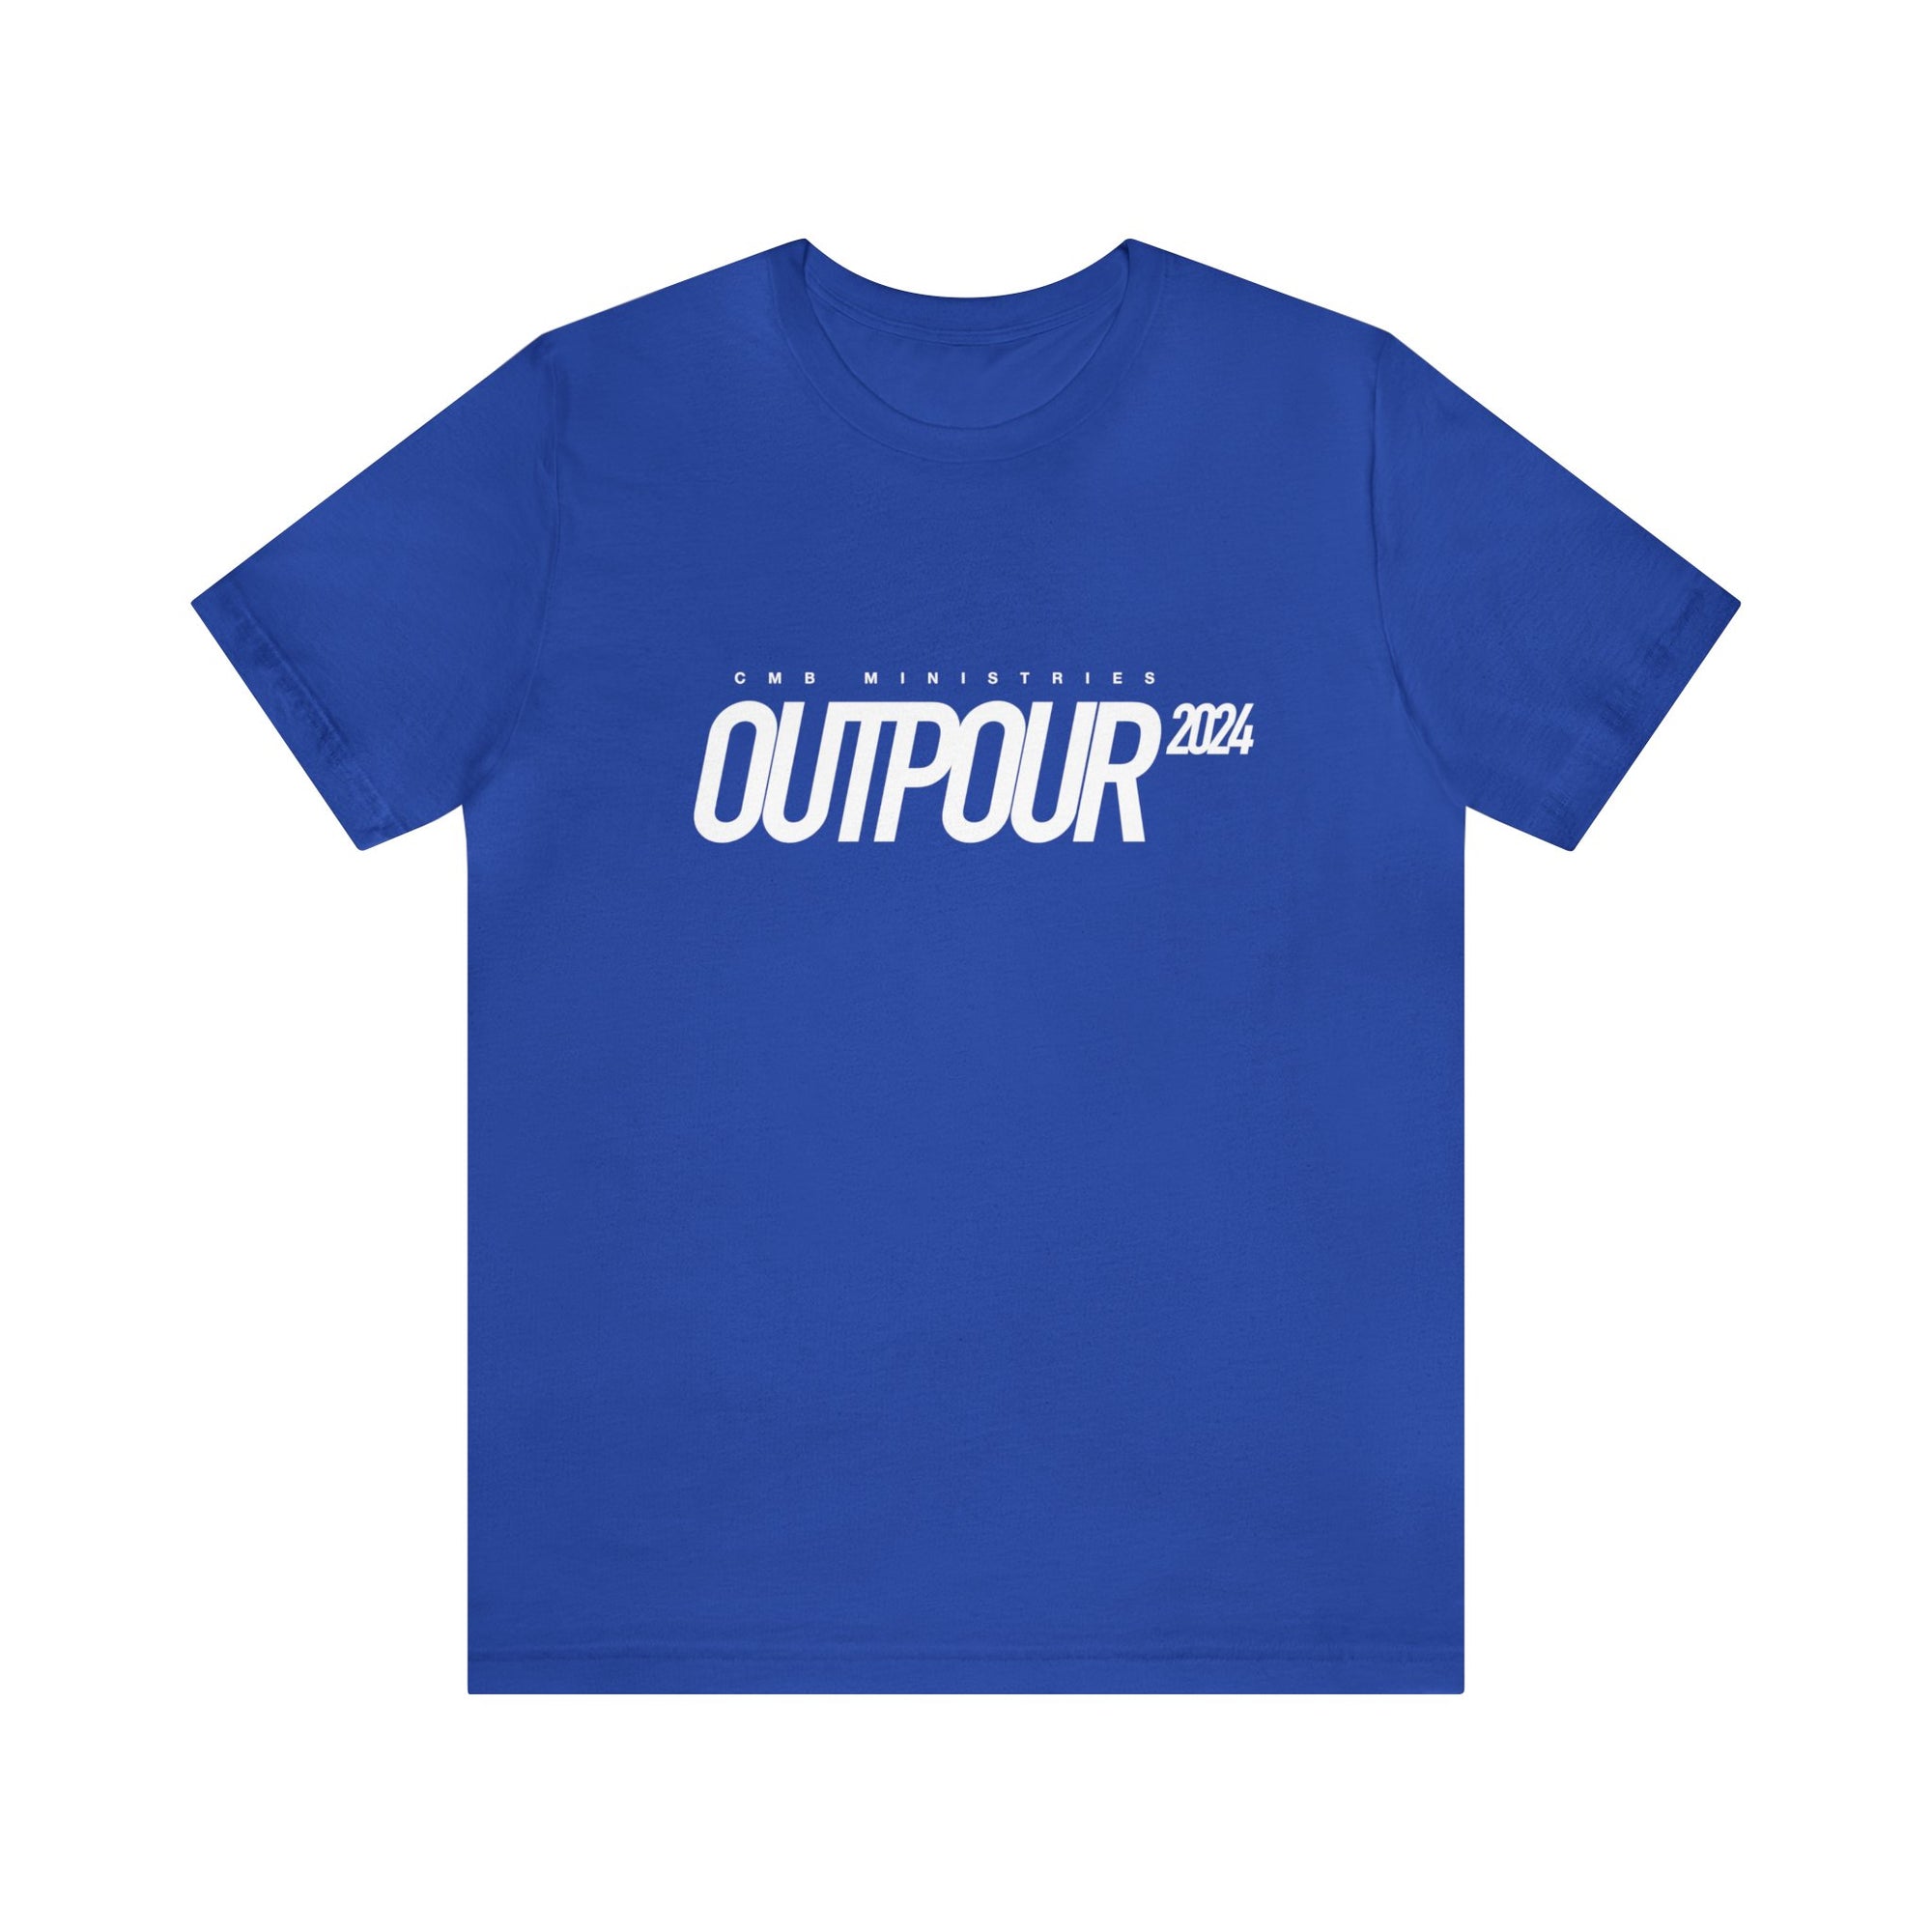 Outpour 2024 (White) - Adult Tee